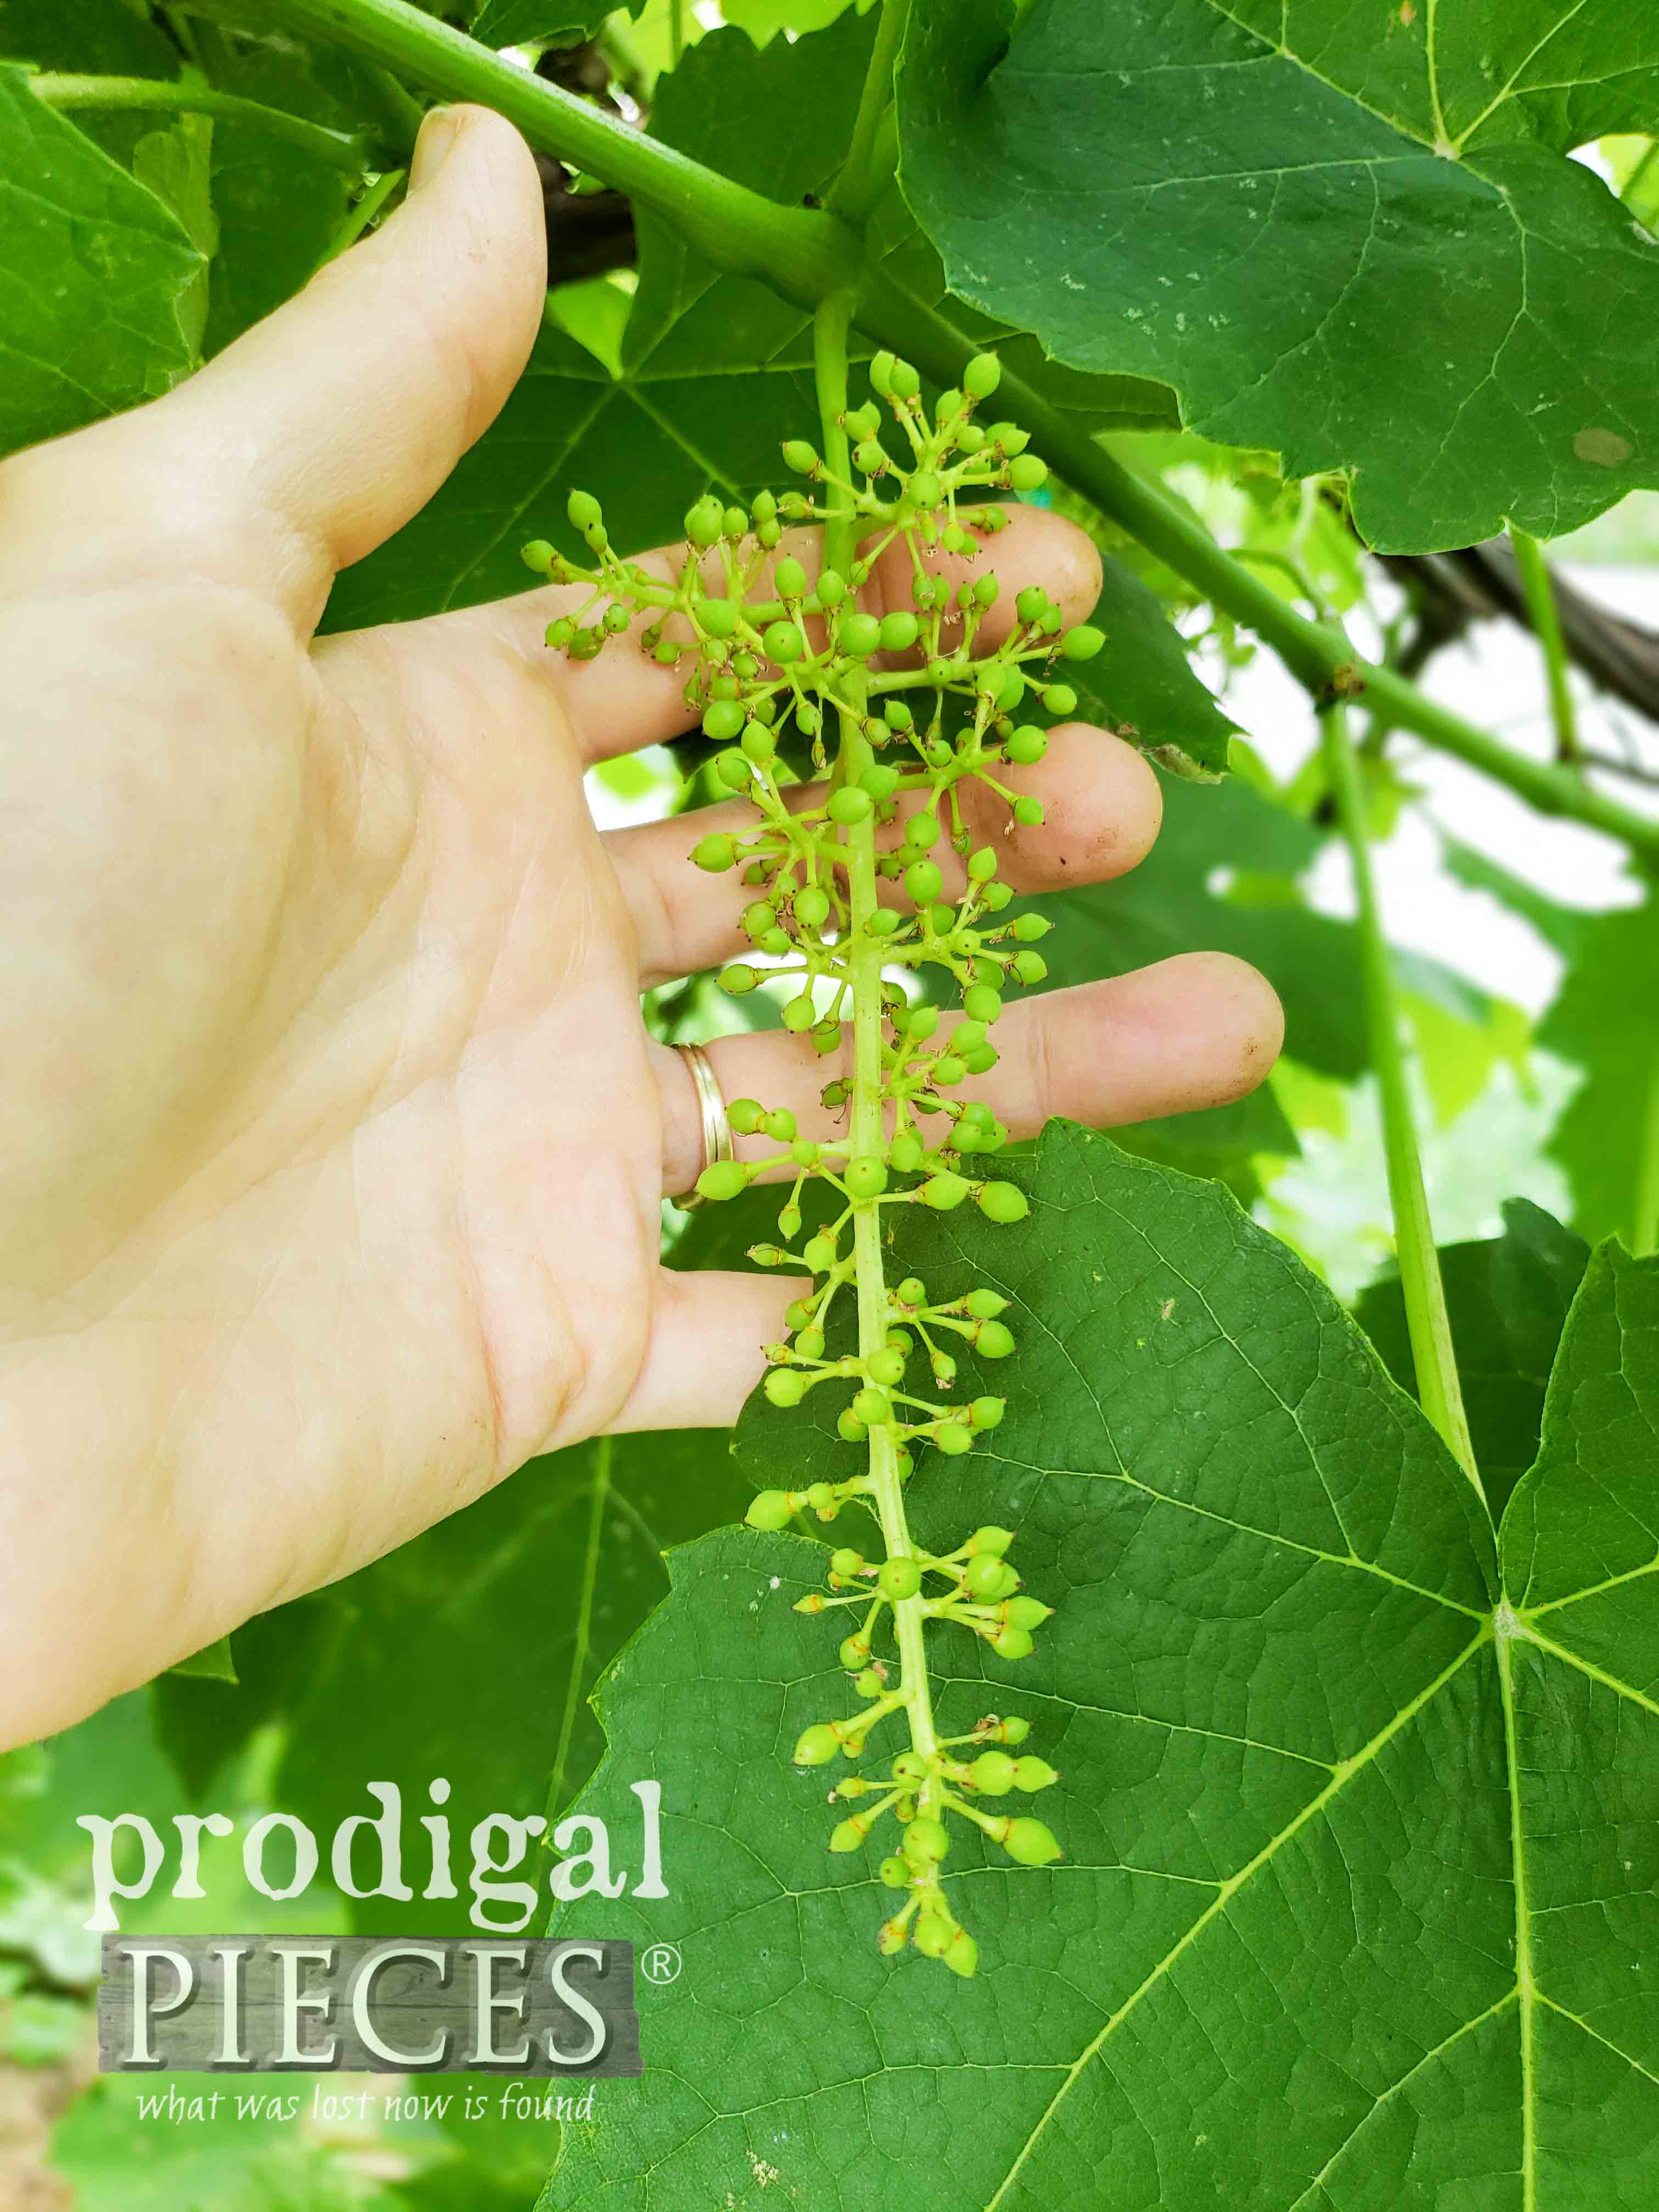 New Grapes Coming on in the Summer | prodigalpieces.com #prodigalpieces #garden